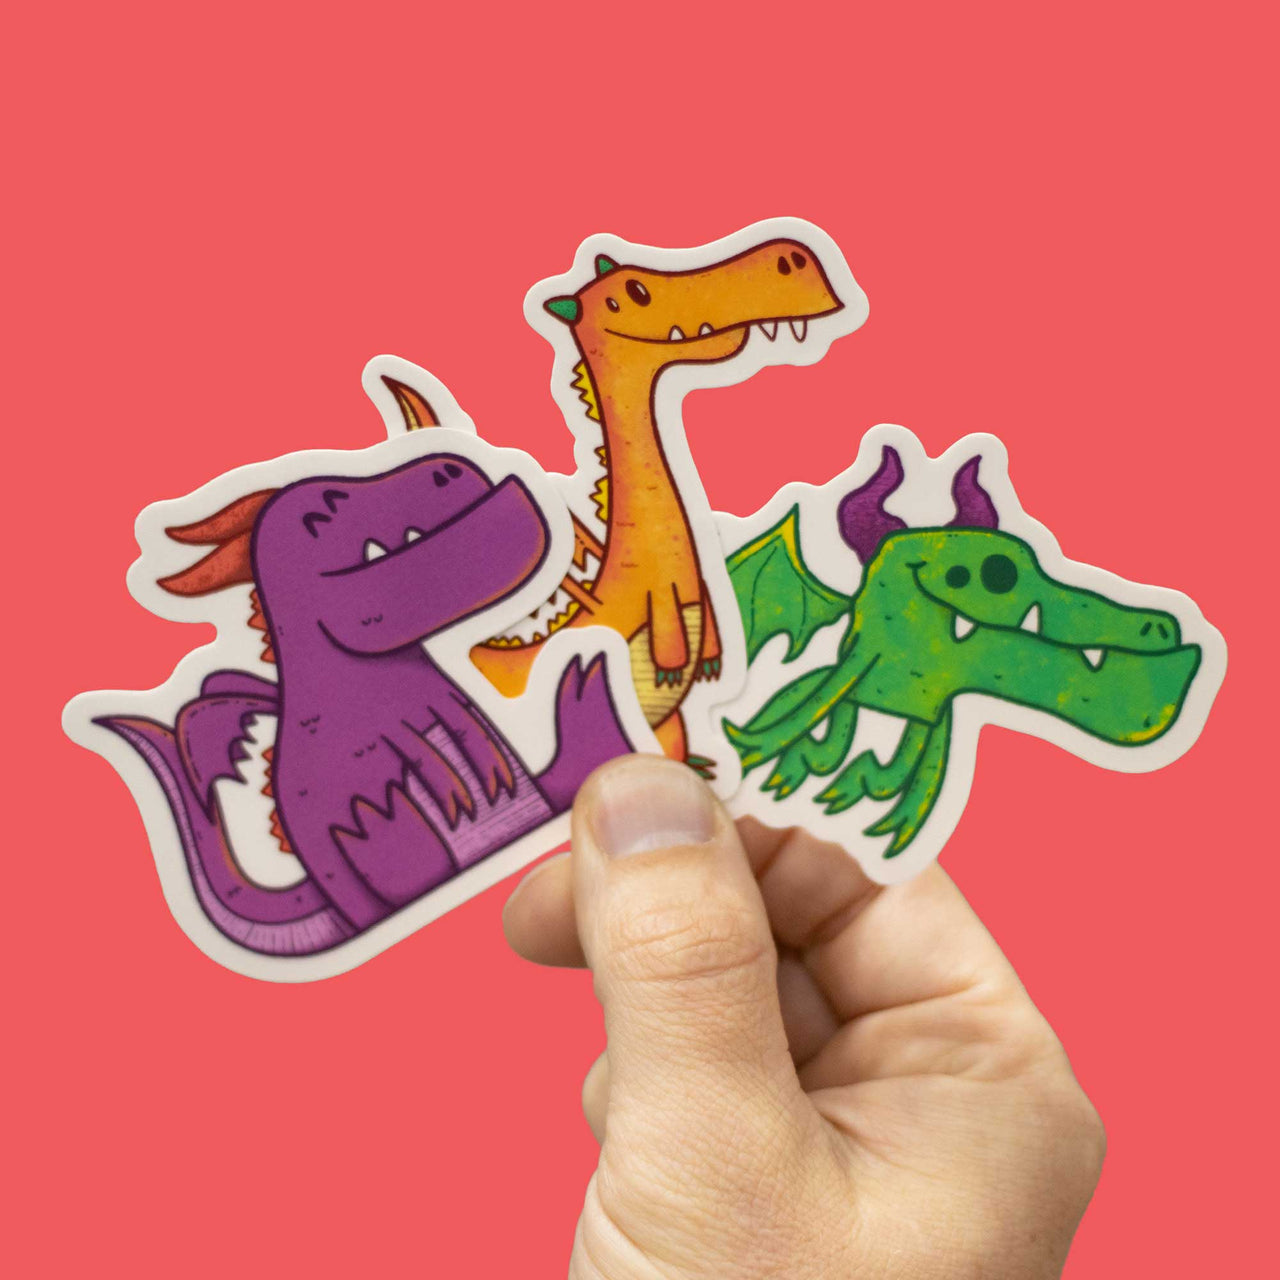 3 dragon stickers in hand